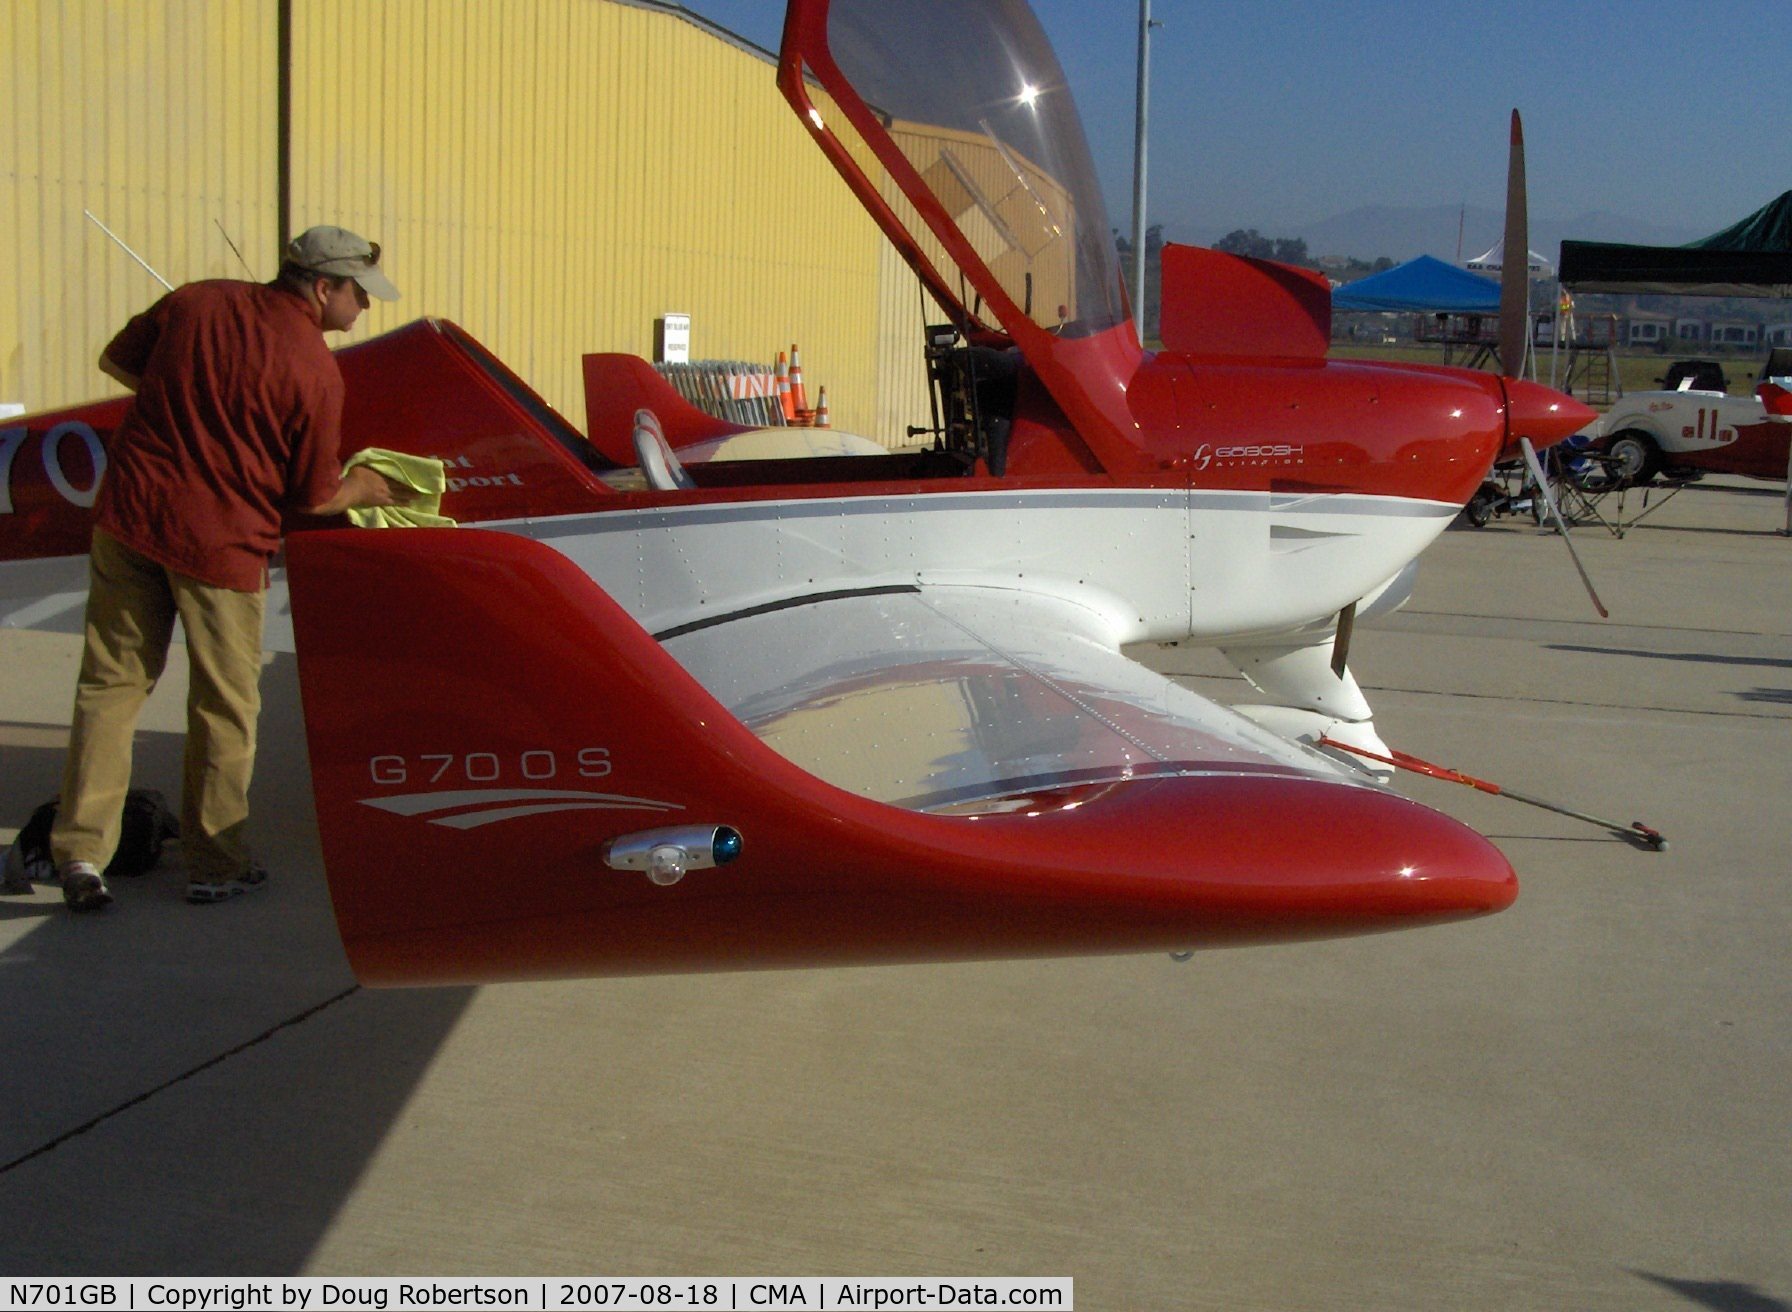 N701GB, 2007 Aero AT-4 LSA C/N AT4-001, 2007 Aero Sp Z O O AT-4 G700S, Rotax 912 ULS 100 Hp, winglet, wing is anodized aluminum skin